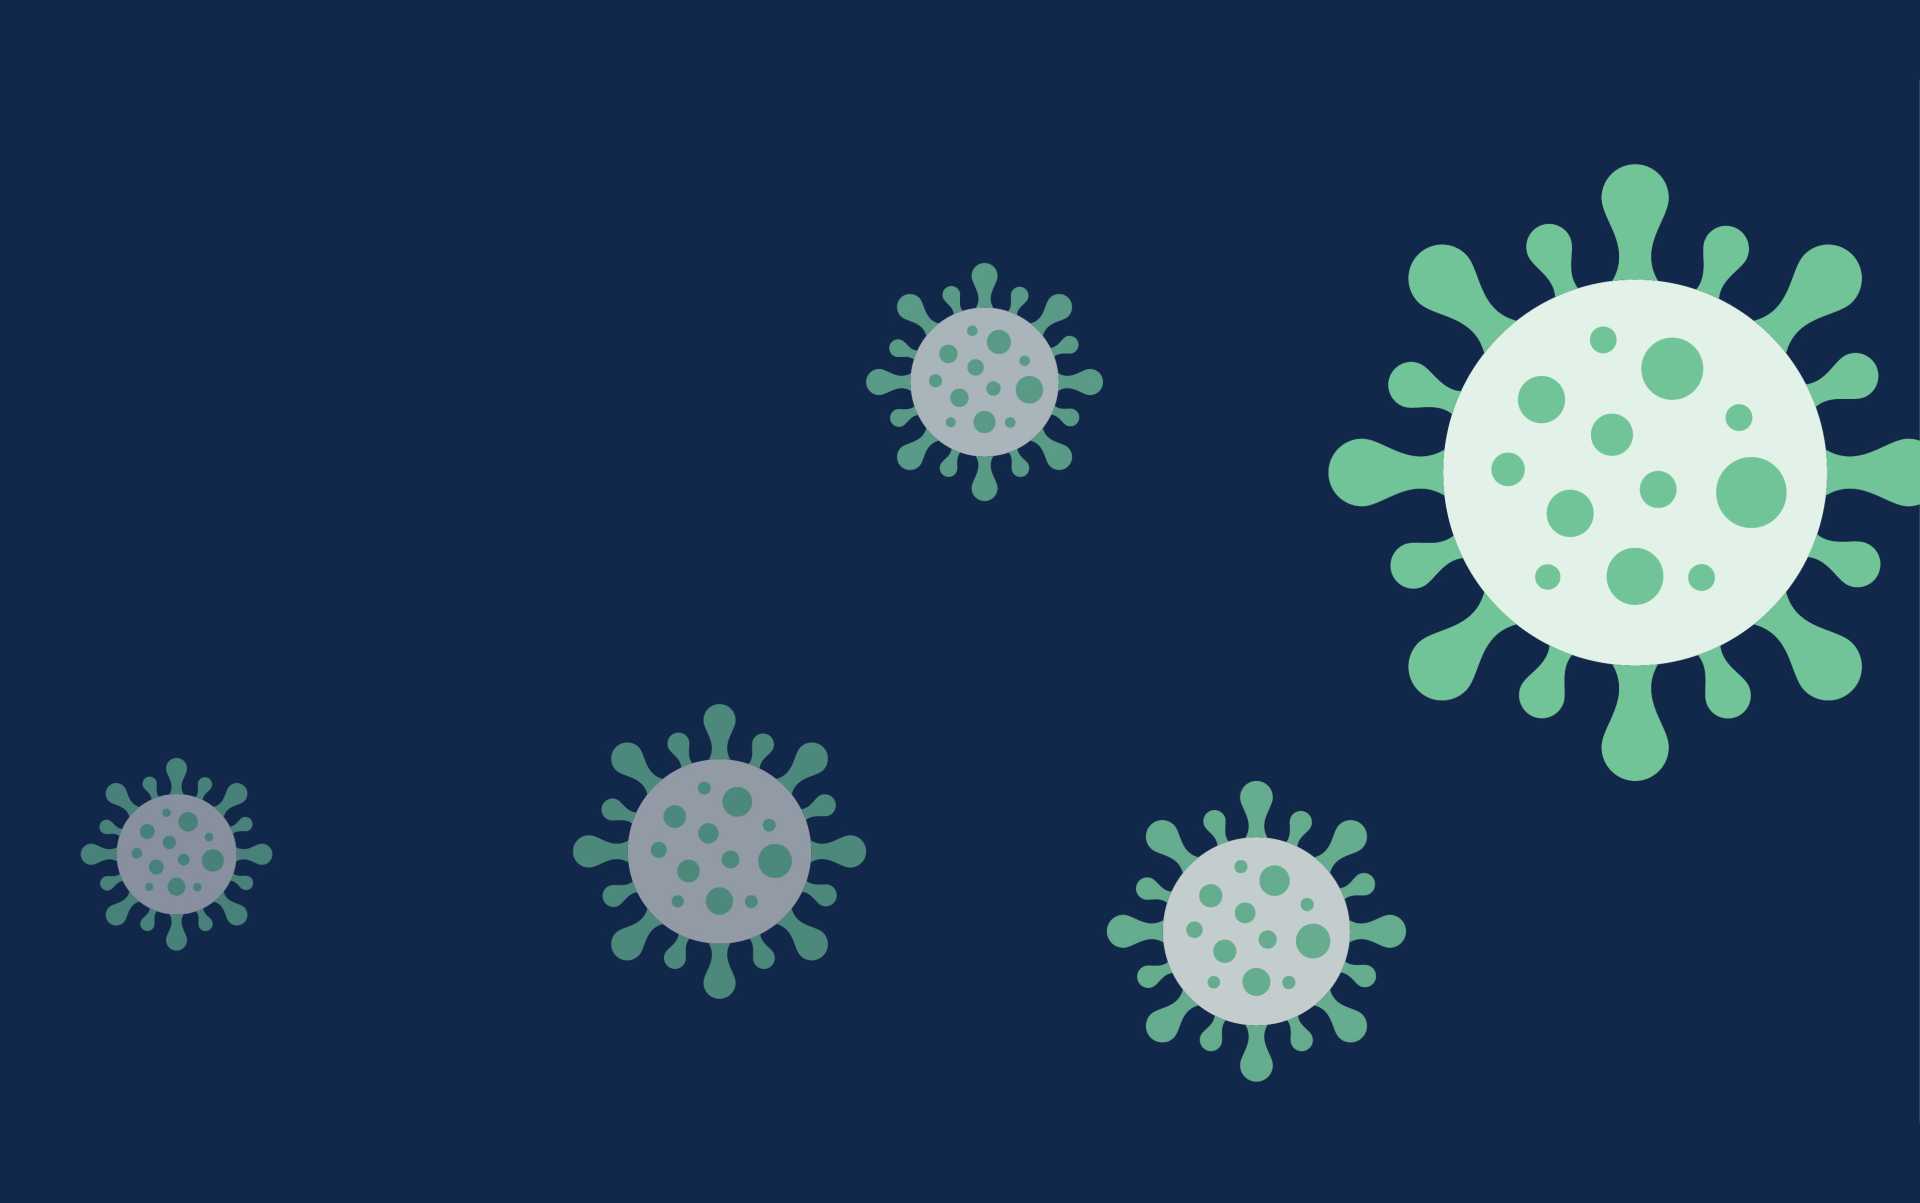 Cartoon illustration of the Covid-19 virus on a blue background